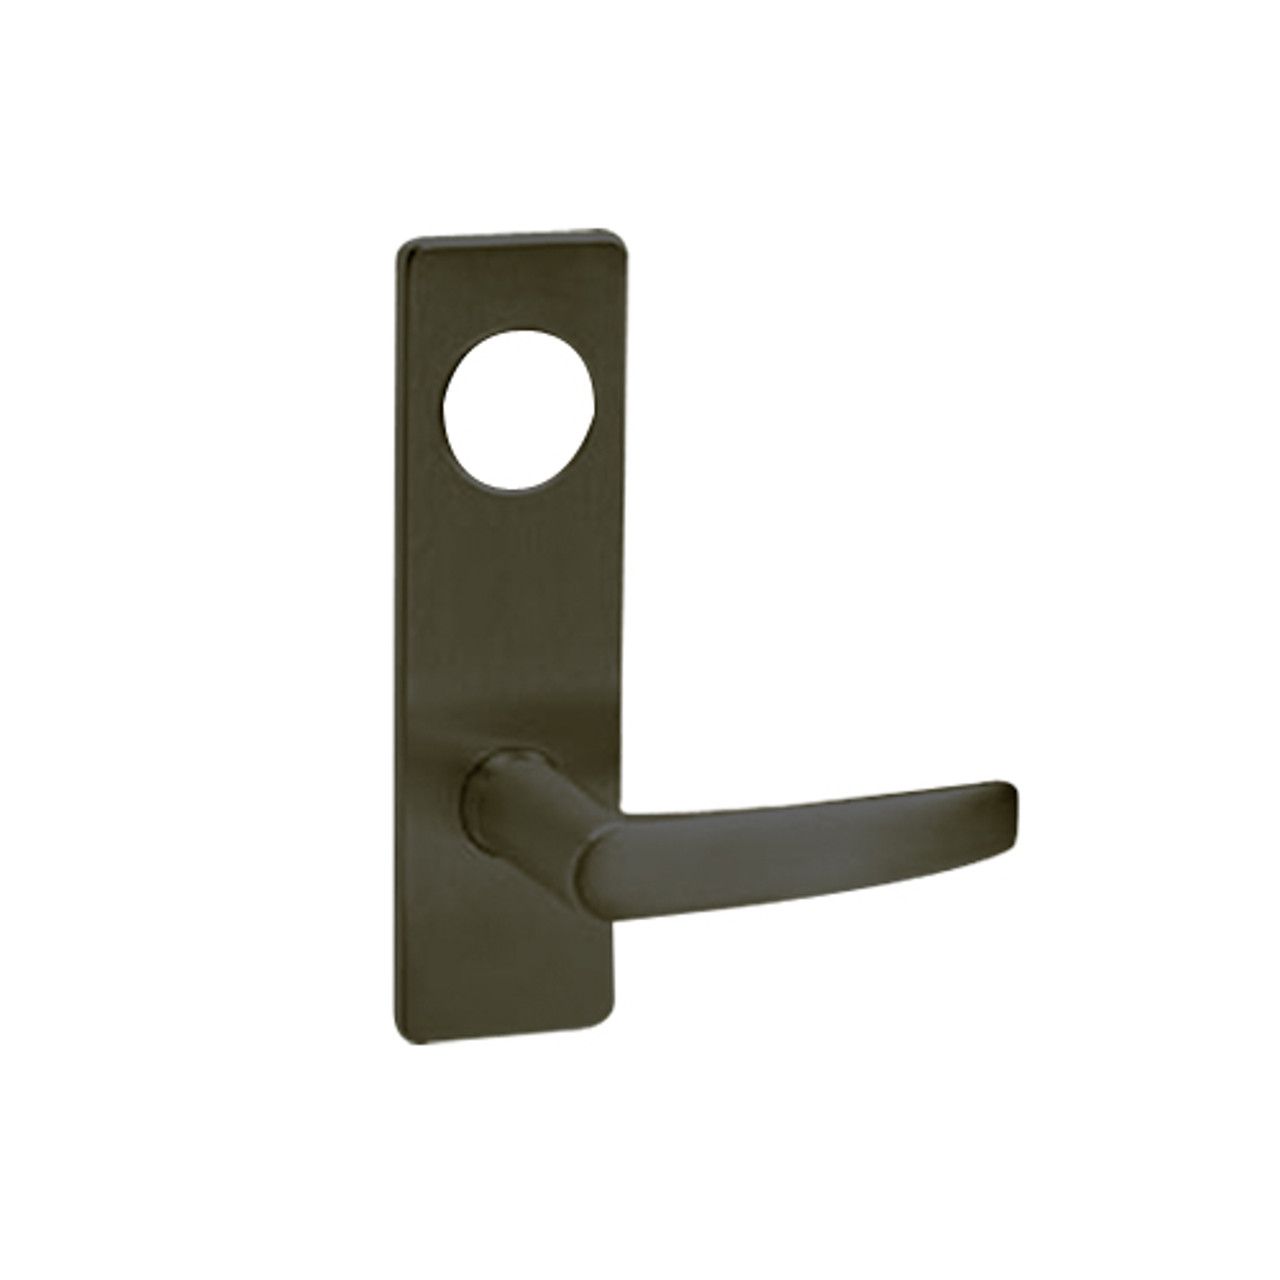 ML2042-ASM-613-CL7 Corbin Russwin ML2000 Series IC 7-Pin Less Core Mortise Entrance Locksets with Armstrong Lever in Oil Rubbed Bronze